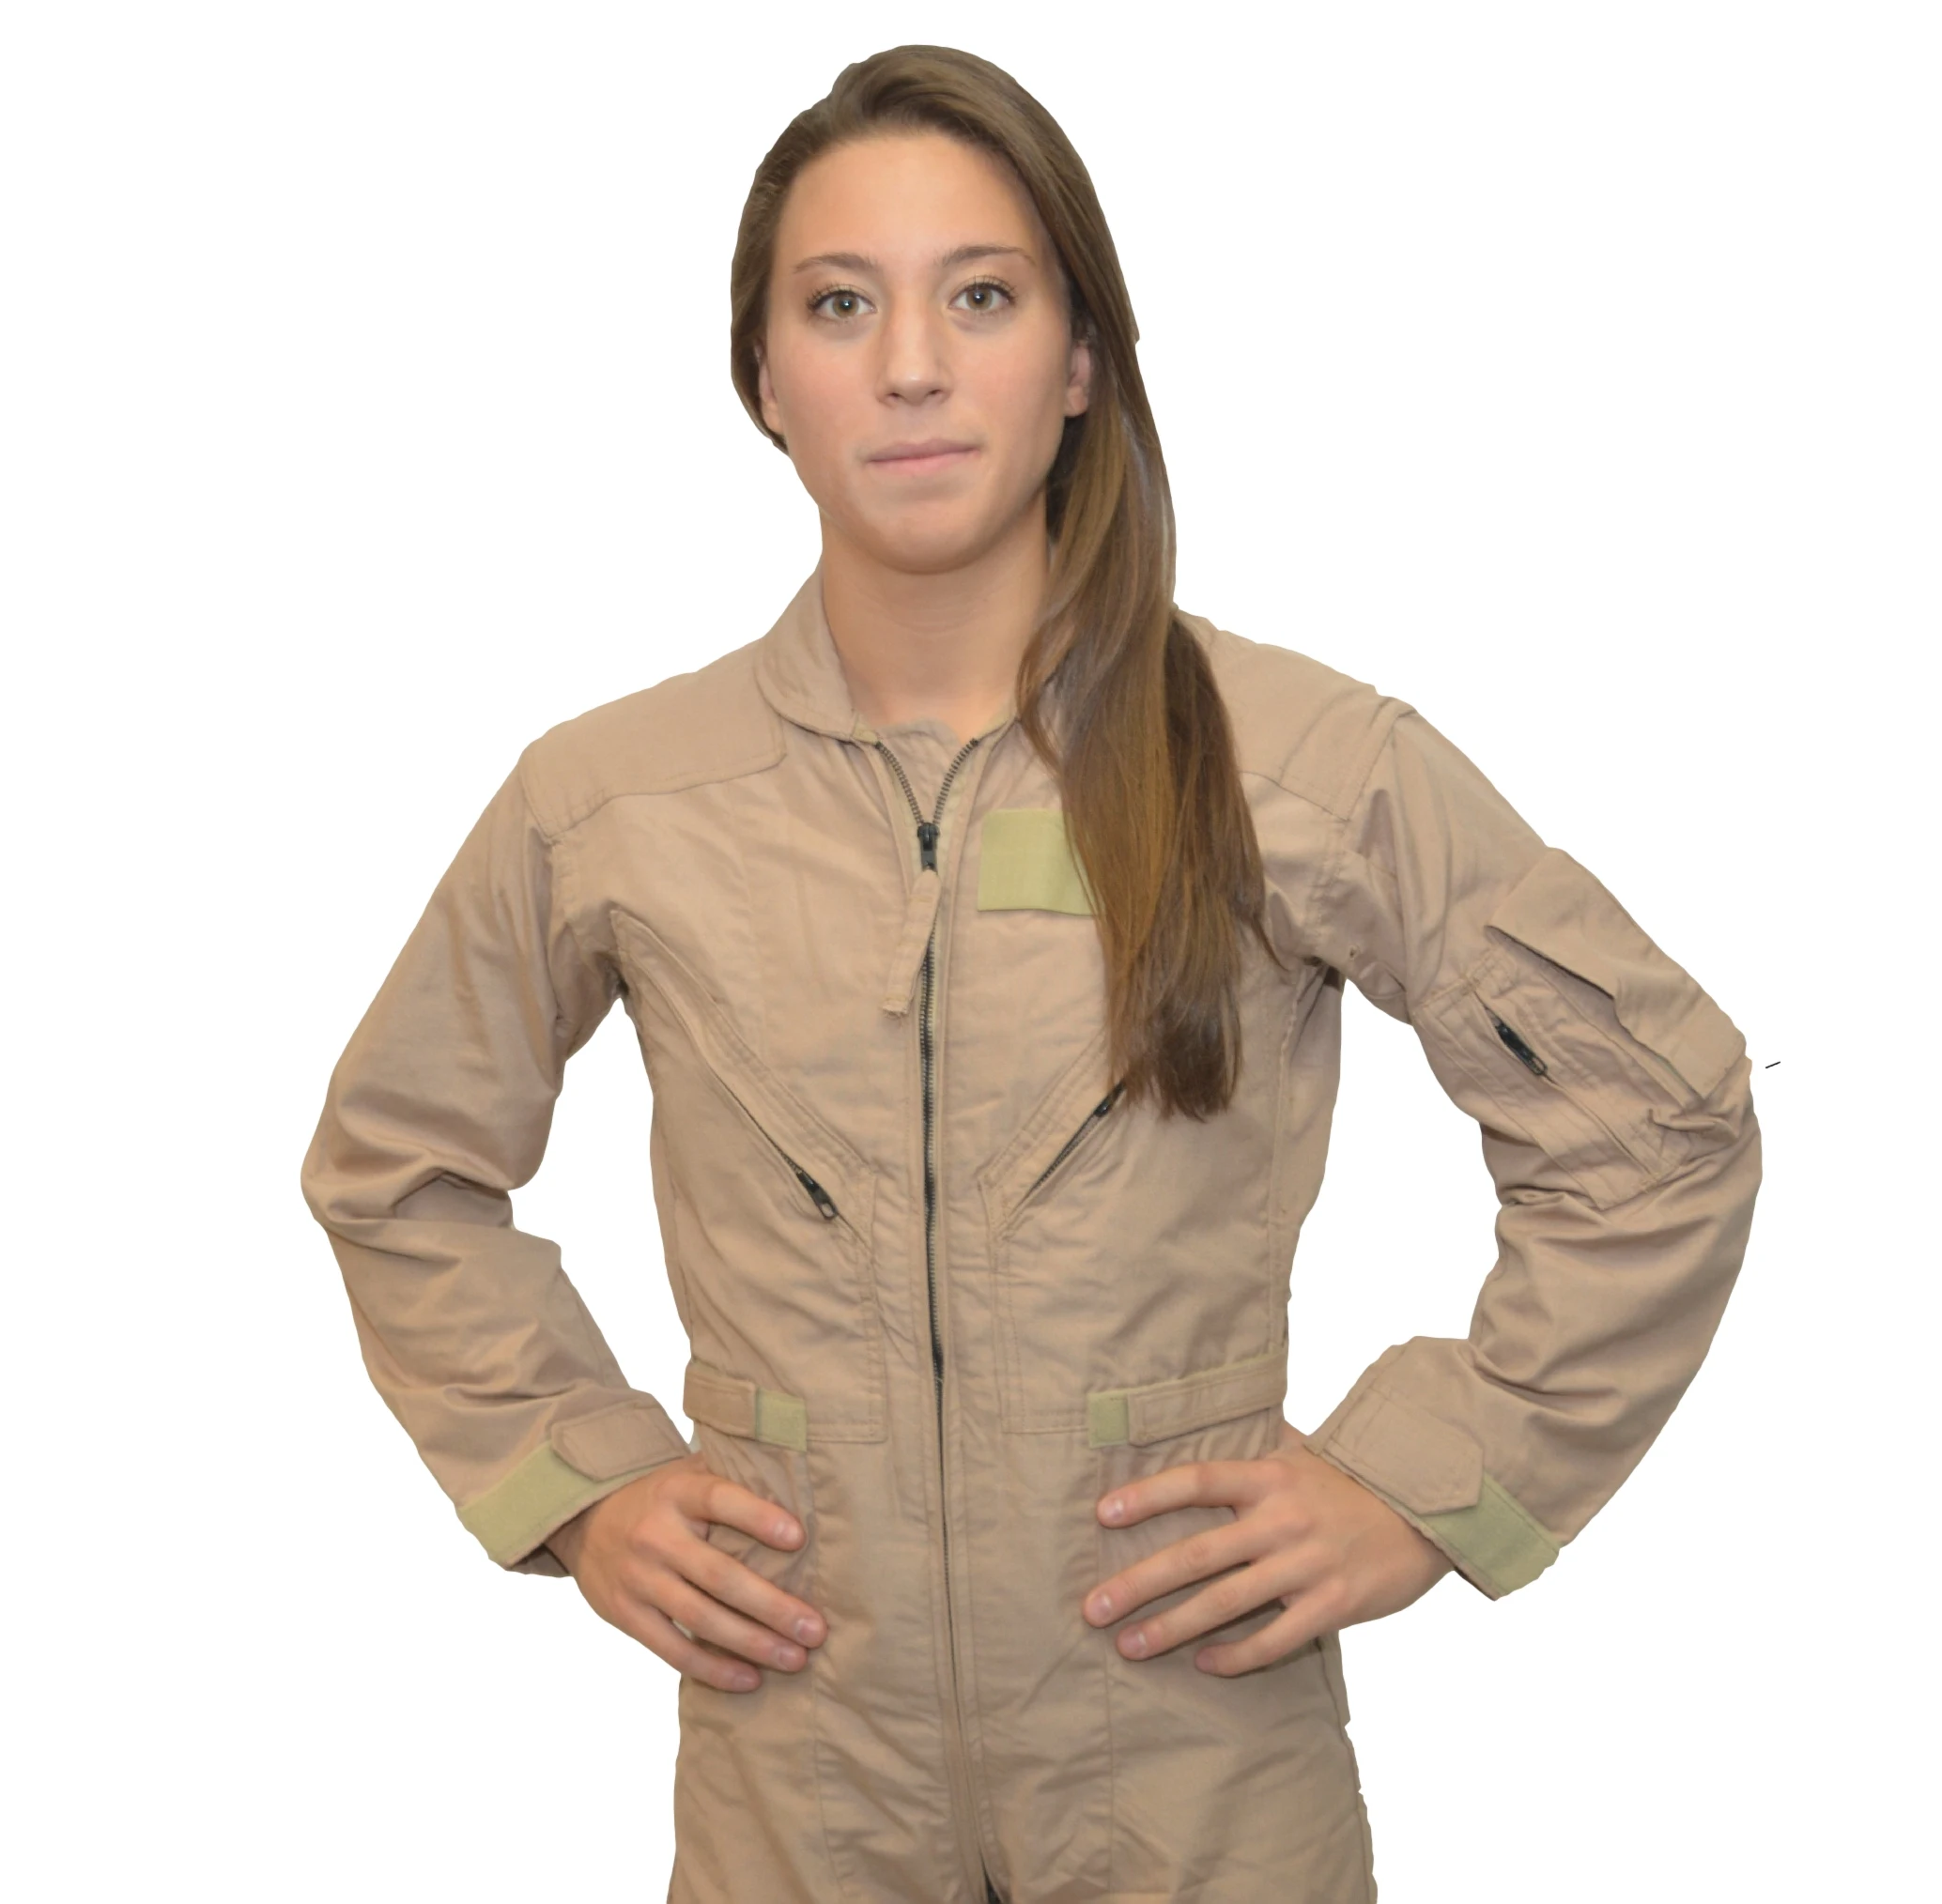 Flame Retardant  Pilot Flight Suit Khaki And Green Flying Coverall Suit For Men